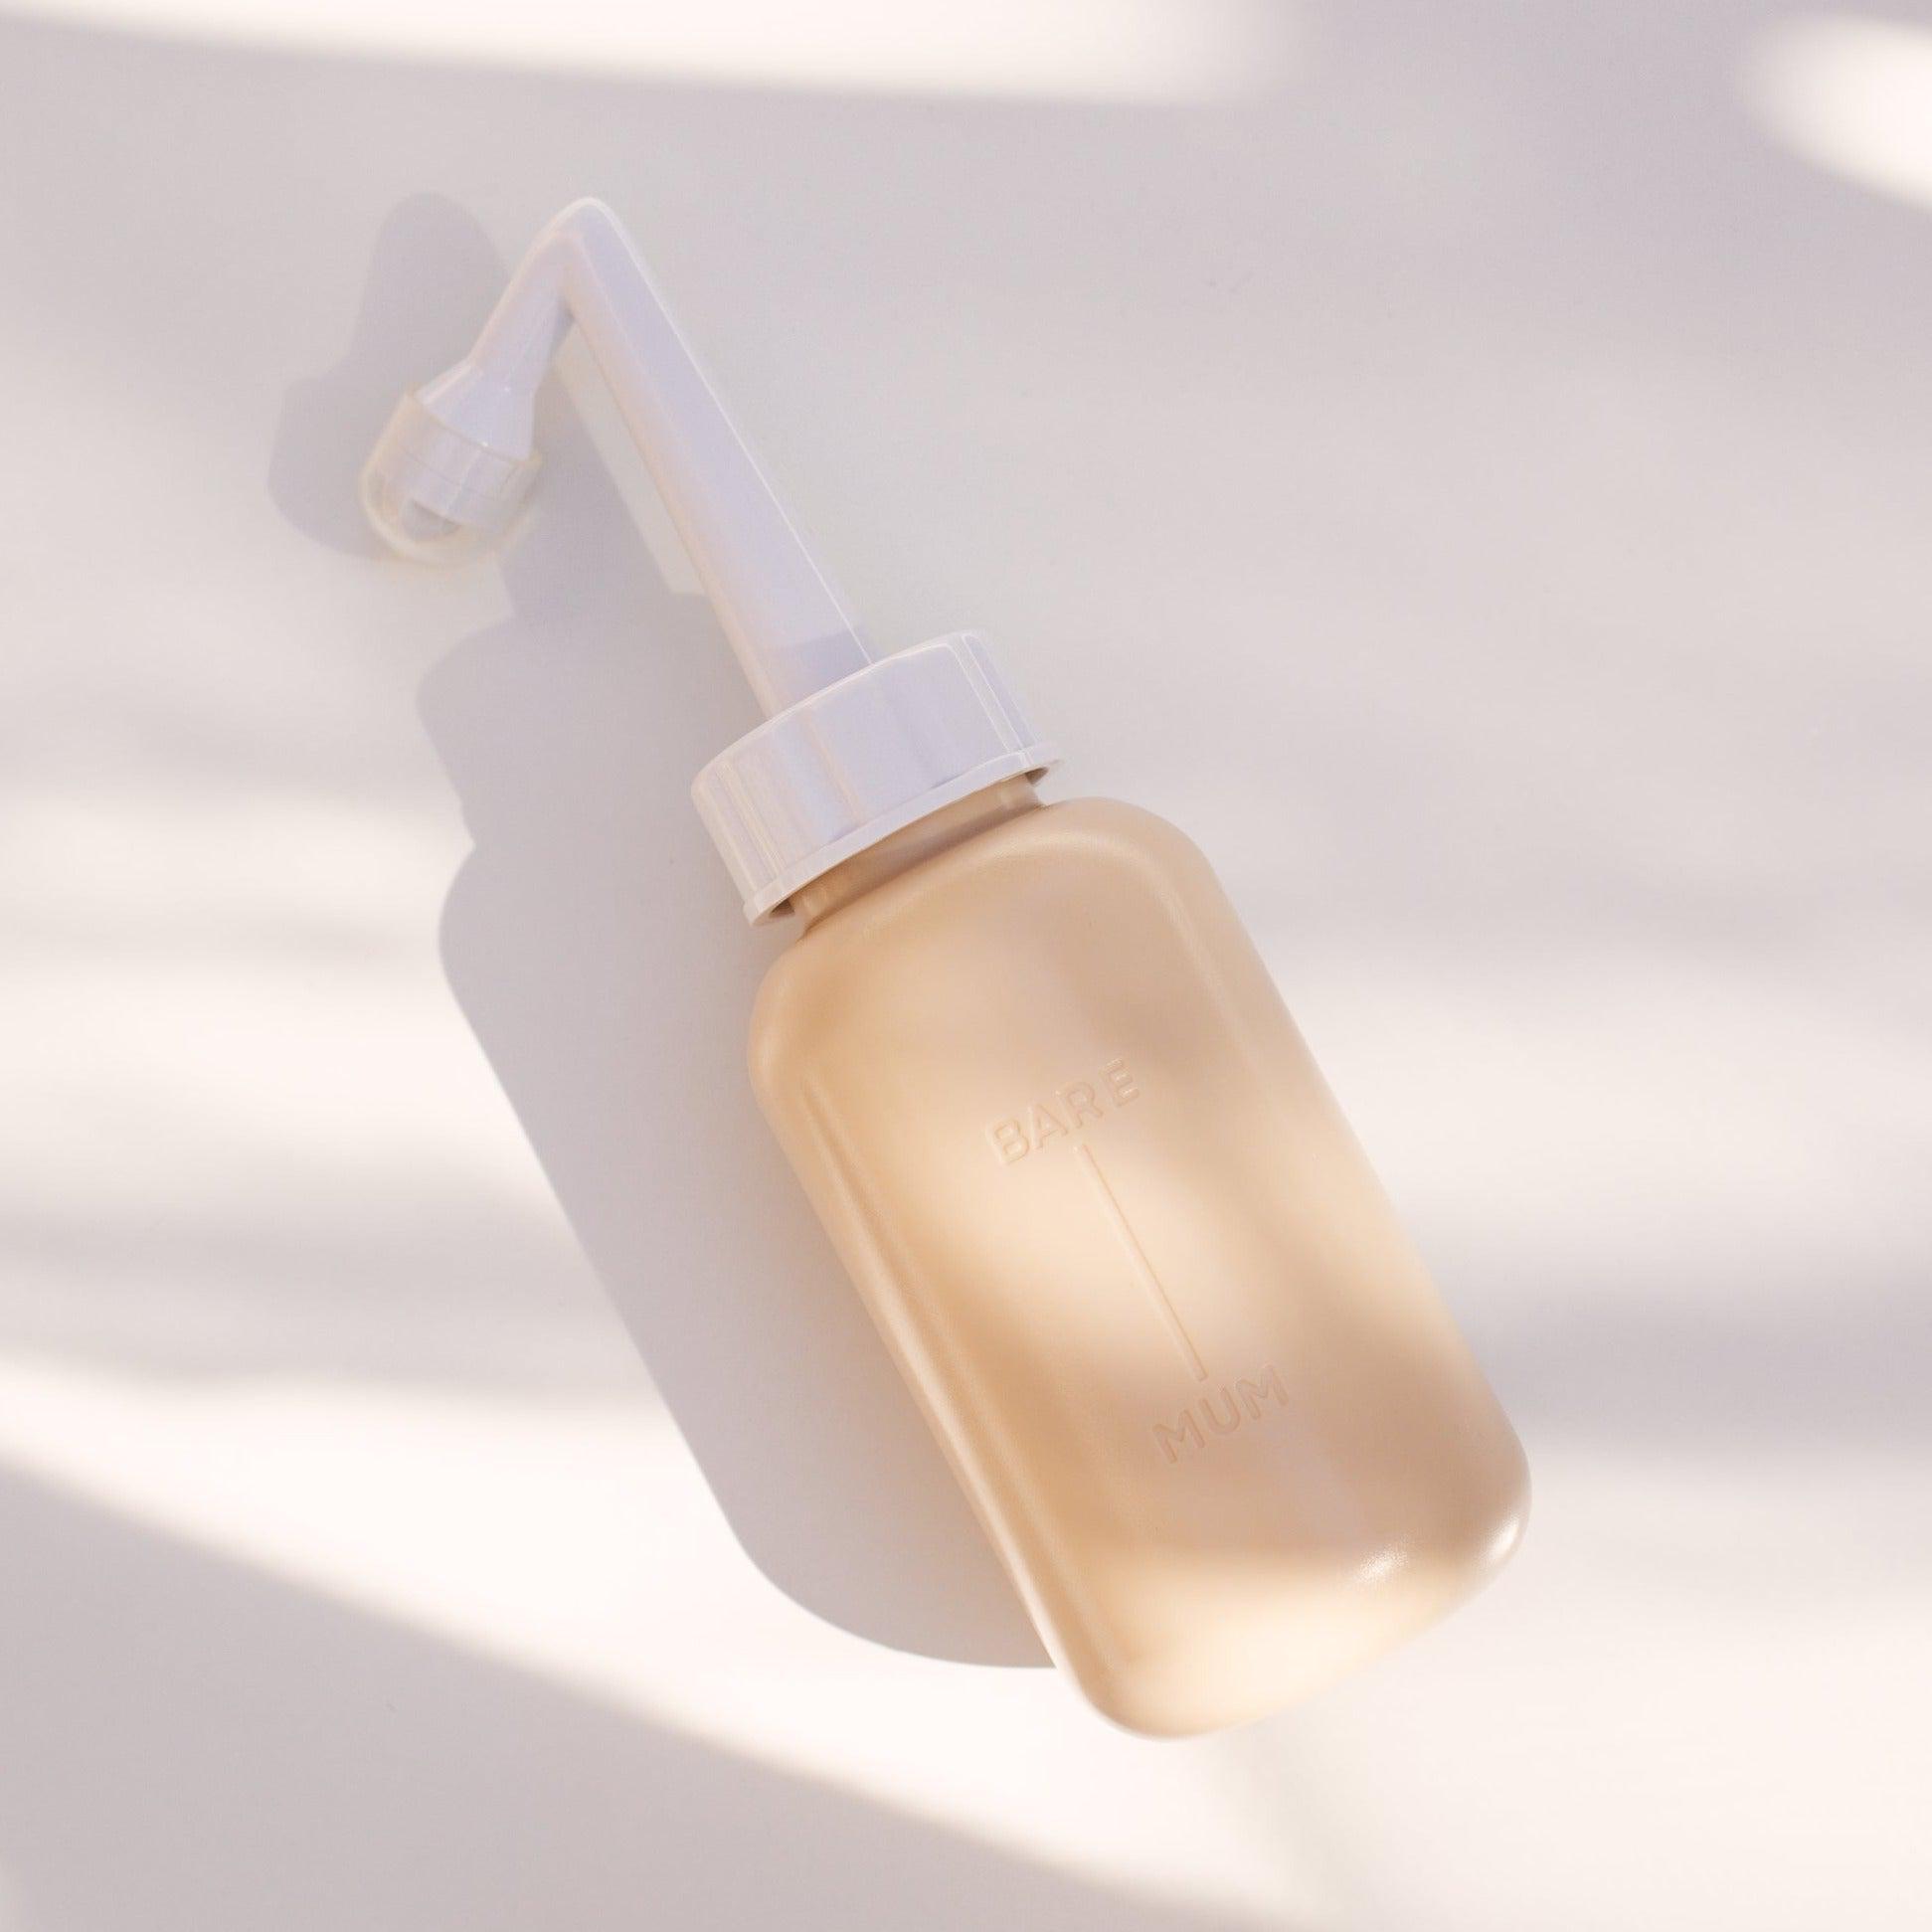 A Bare Mum Perineal Wash Bottle designed for post-birth recovery sitting on a white surface.